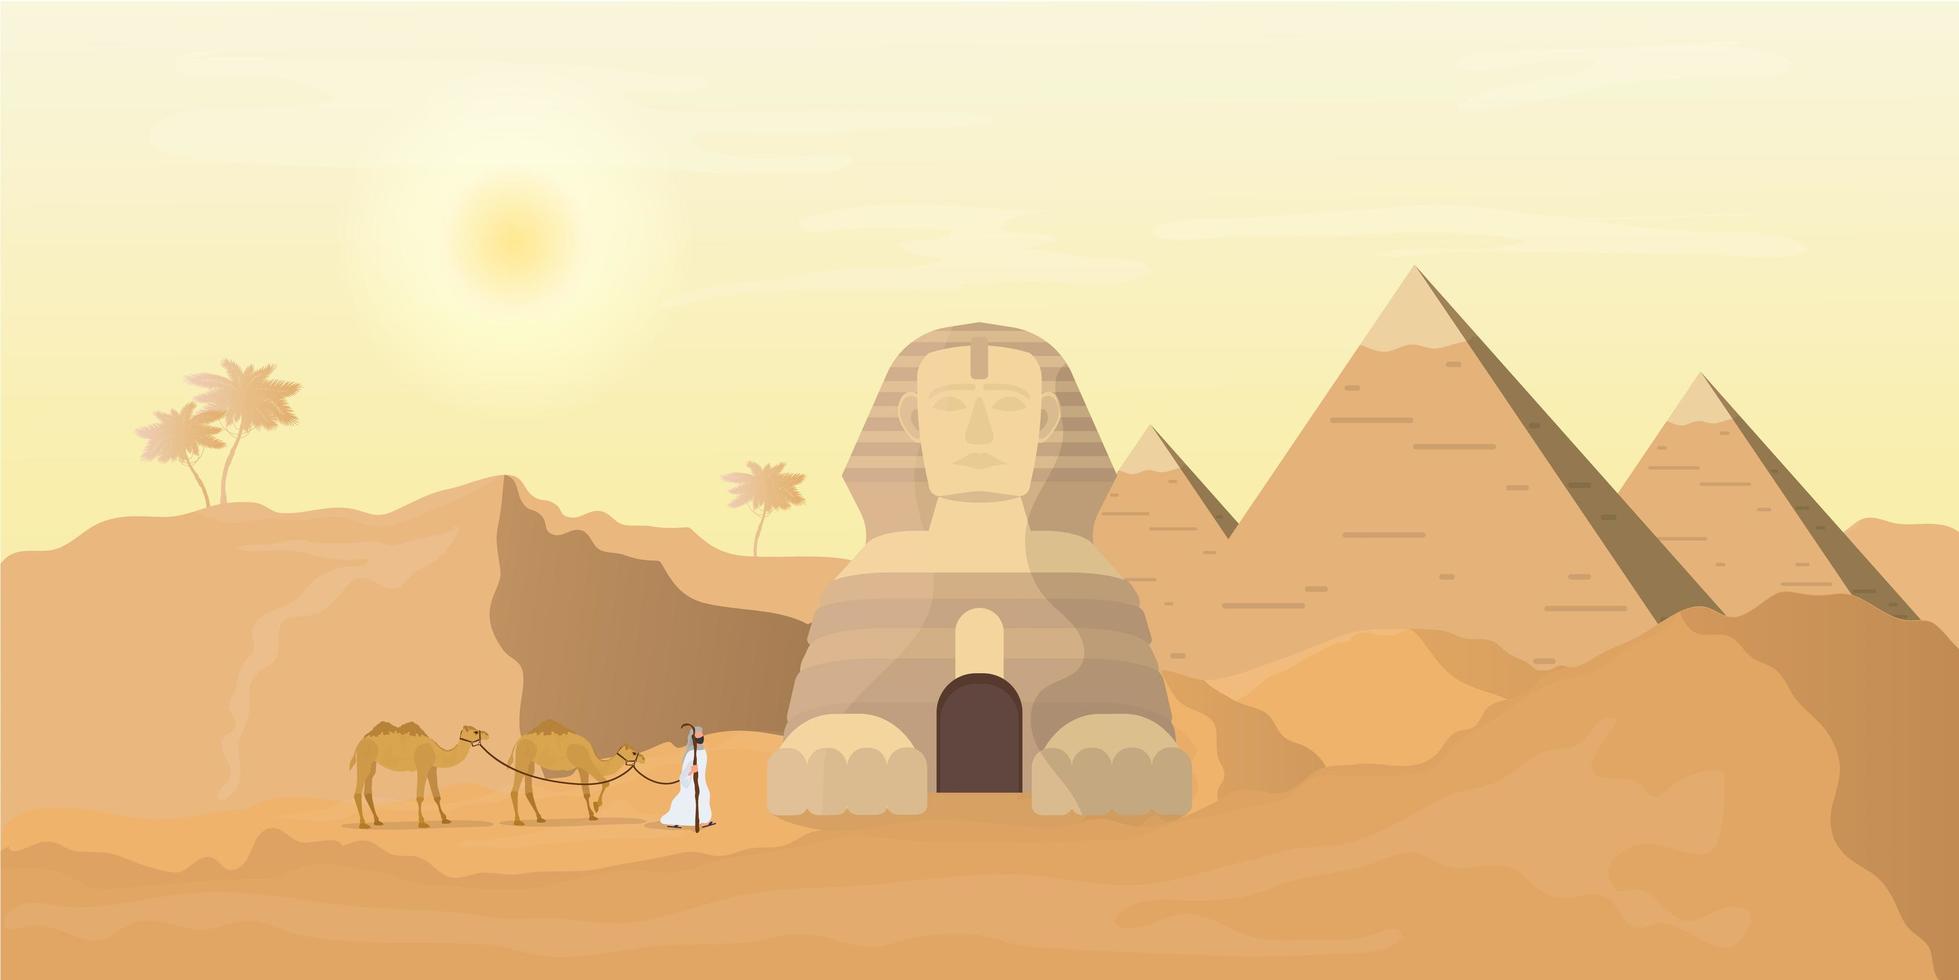 Egyptian Sphinx and Pyramids. Desert. A man leads camels through the desert. vector